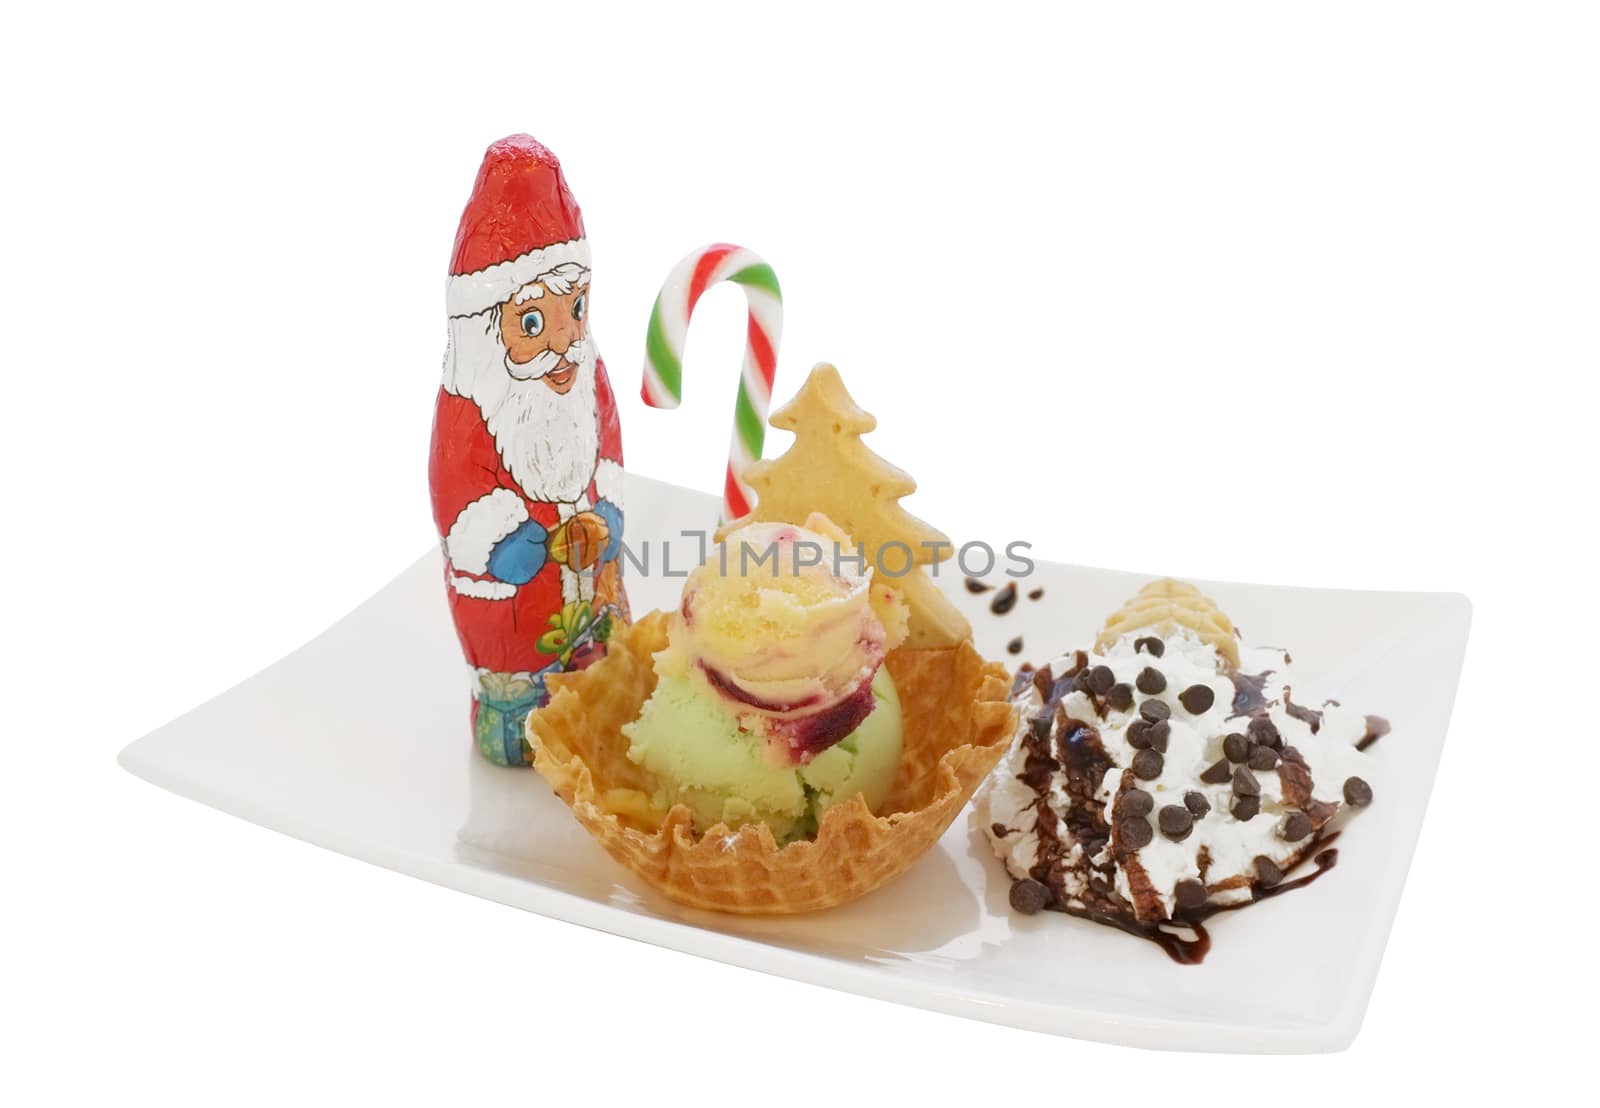 Ice cream in wafer cone / bowl with christmas decoration by Hepjam